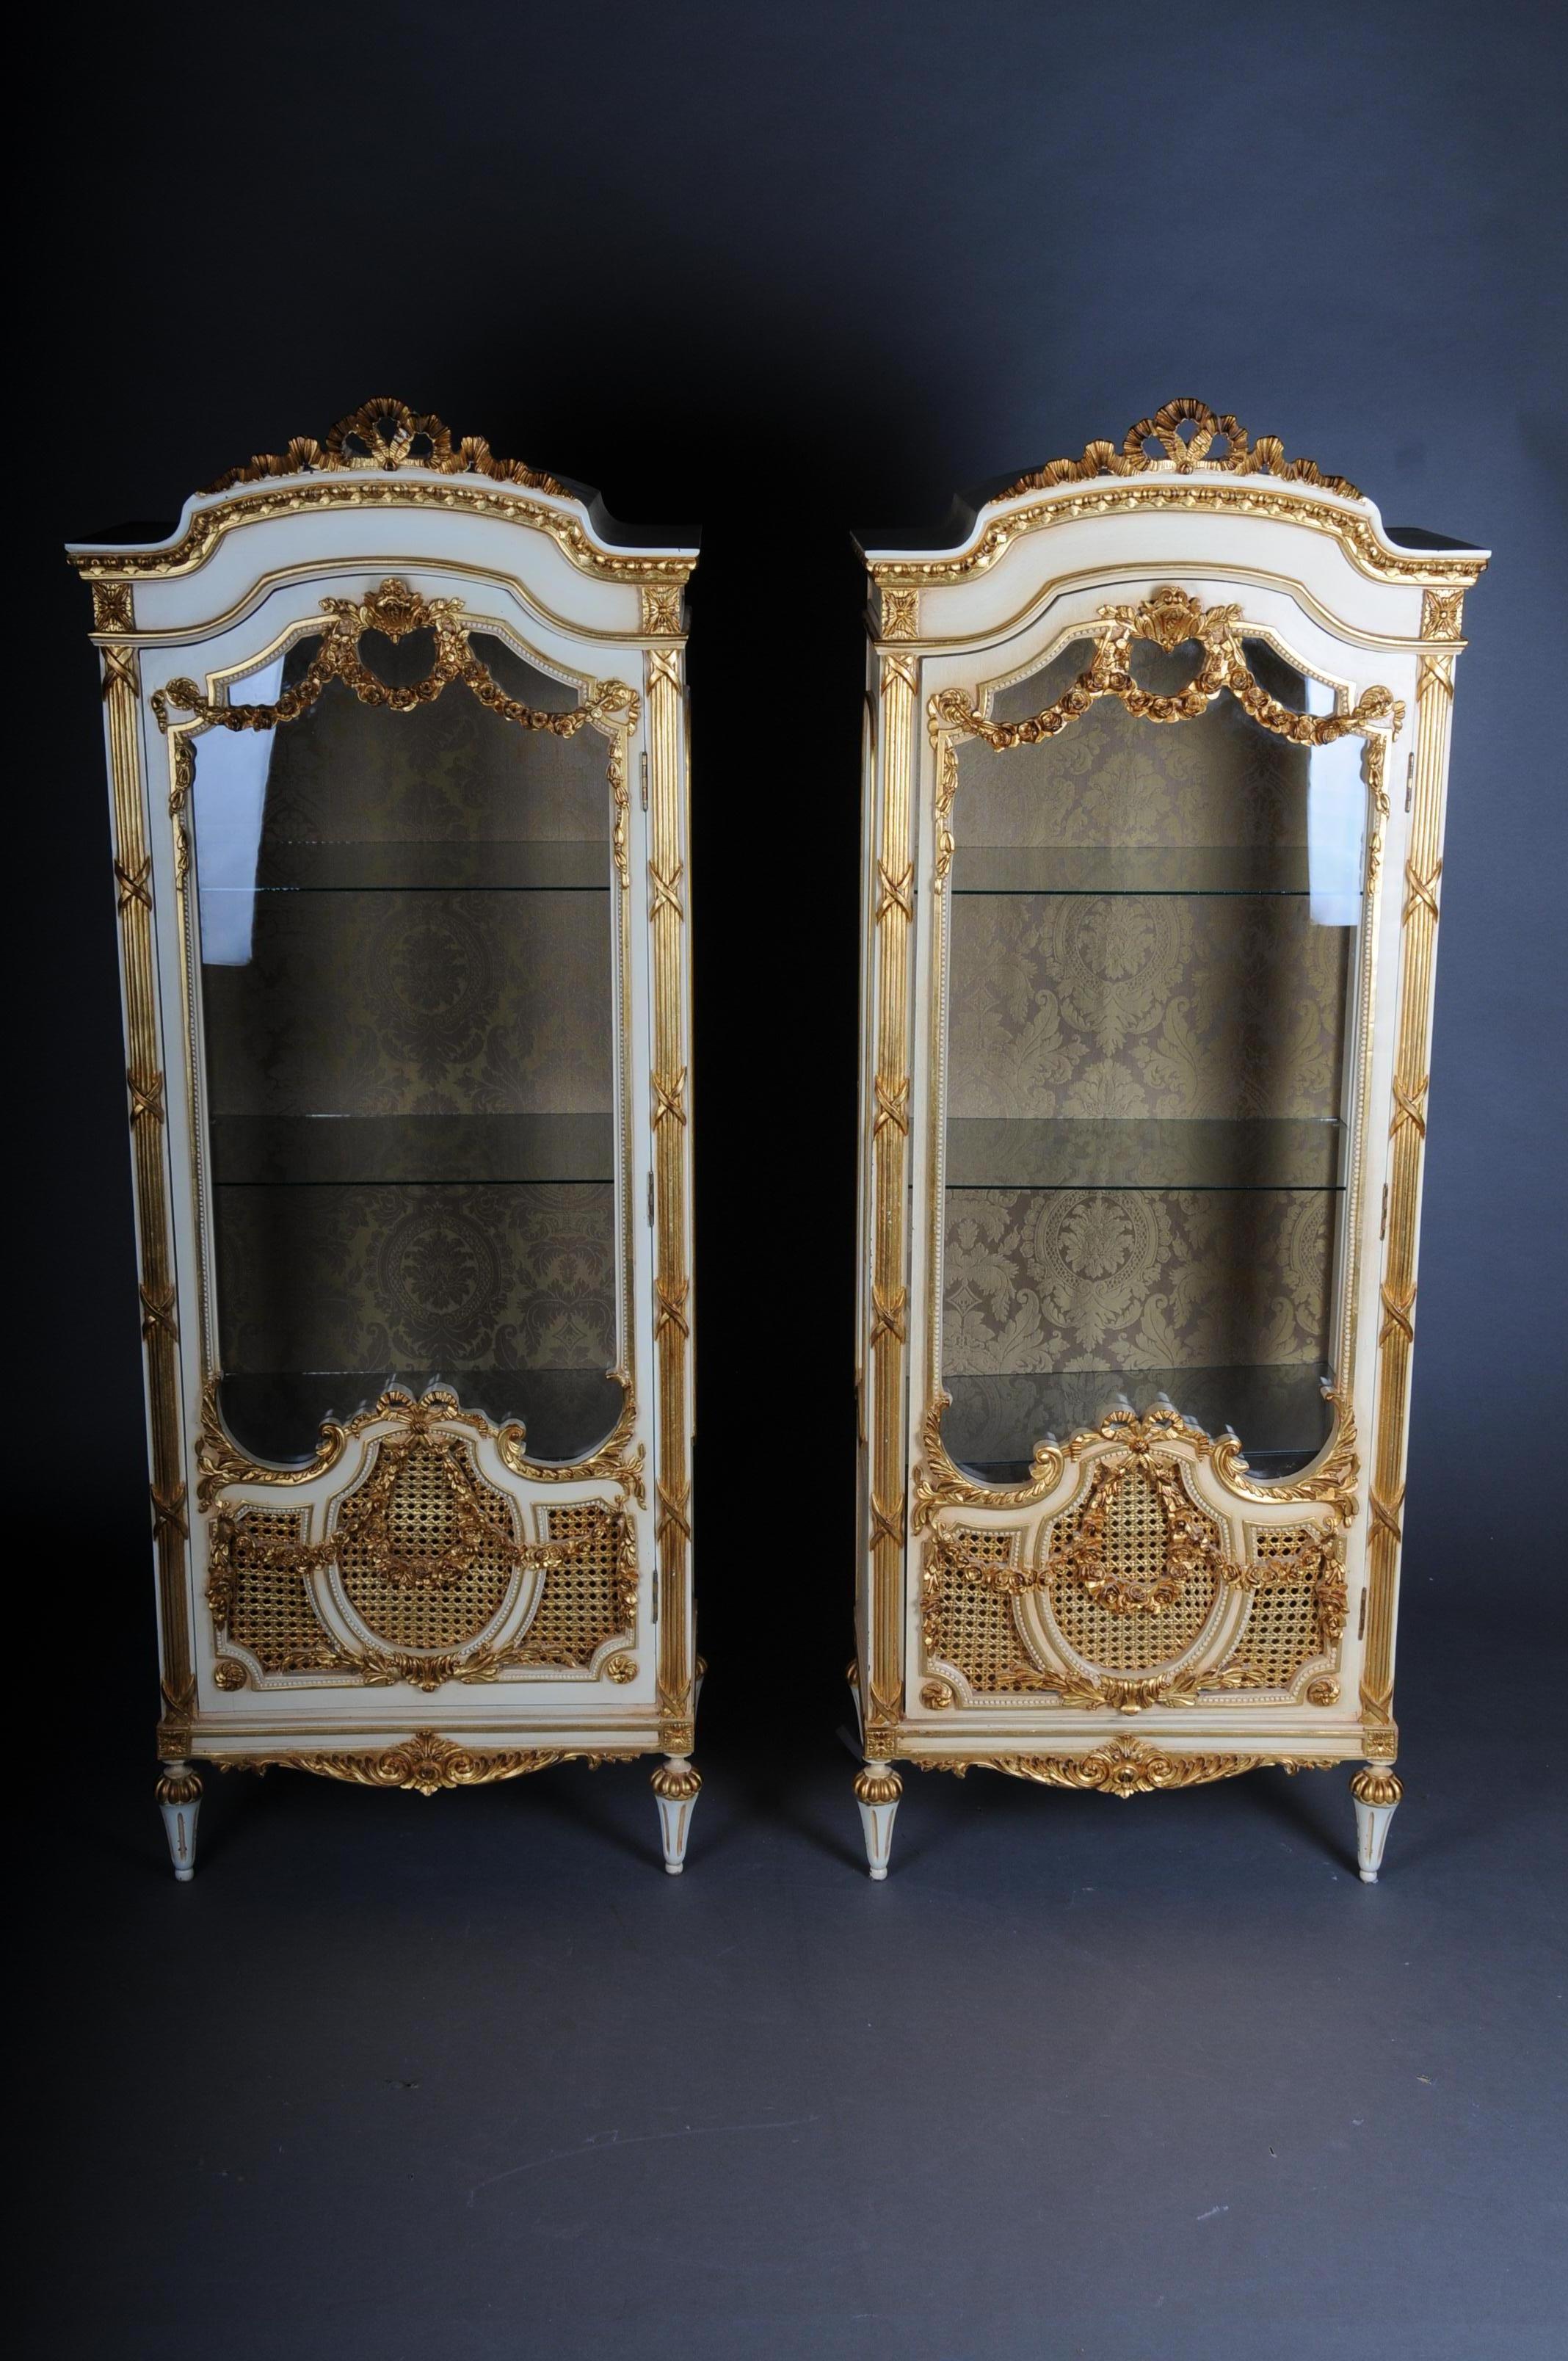 20th century elegant French Louis XVI style showcase

Solid beech wood, beige / cream frame and partially gold-plated. Upright rectangular, three-sided, facet-cut glazed, single-door body on conical legs. The front, corners and sides are provided